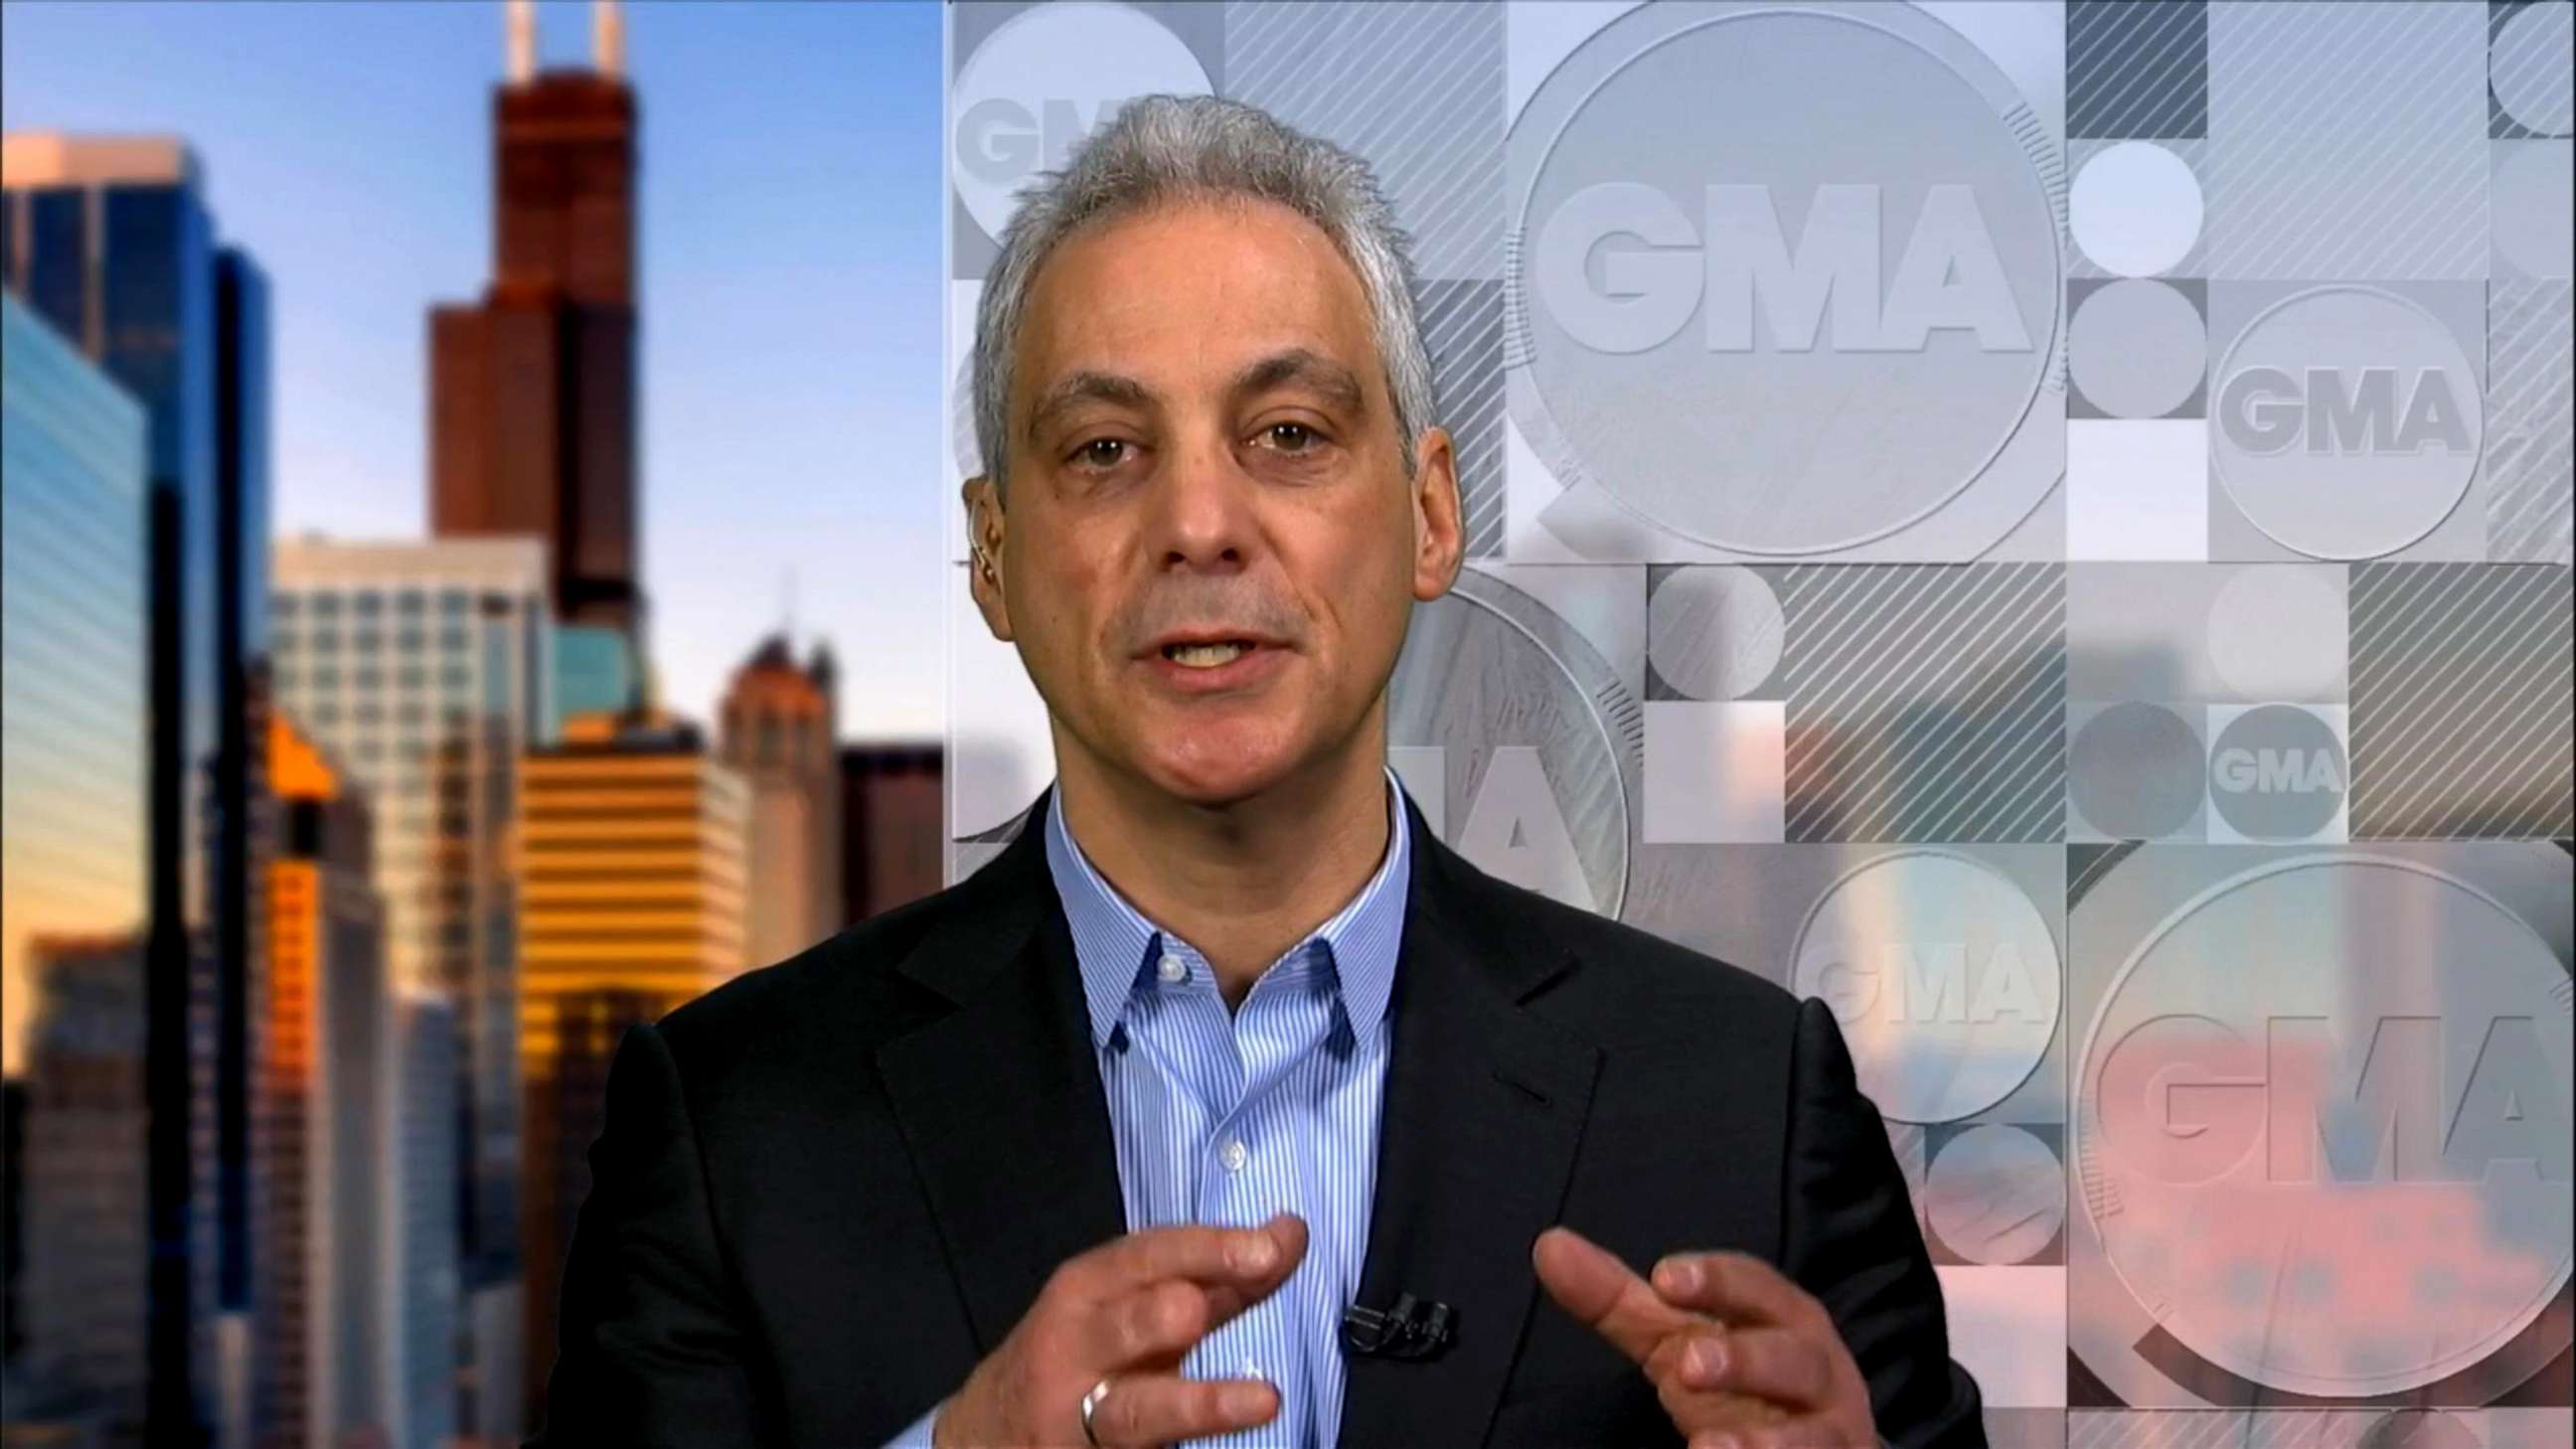 PHOTO: Chicago Mayor Rahm Emanuel appears on "Good Morning America," March 27, 2019.